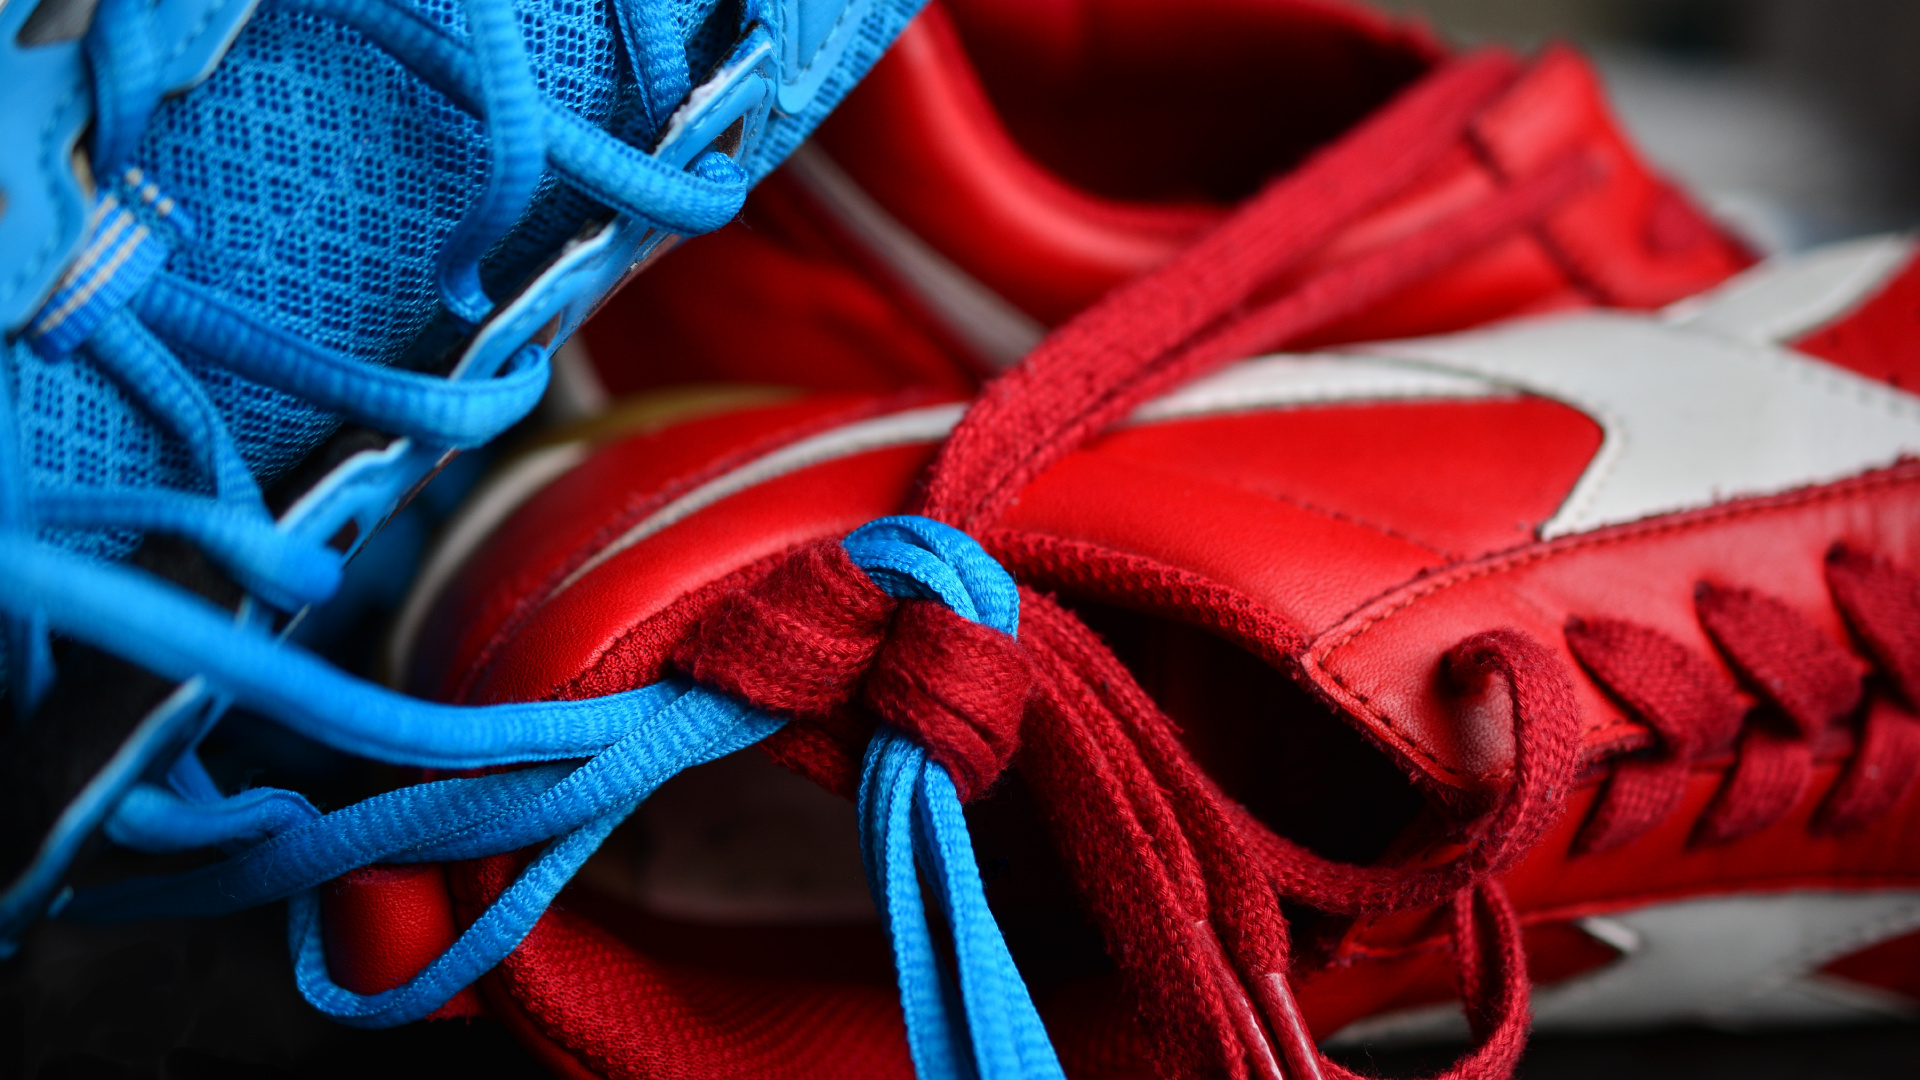 Red and Blue Lace up Shoes. Wallpaper in 1920x1080 Resolution